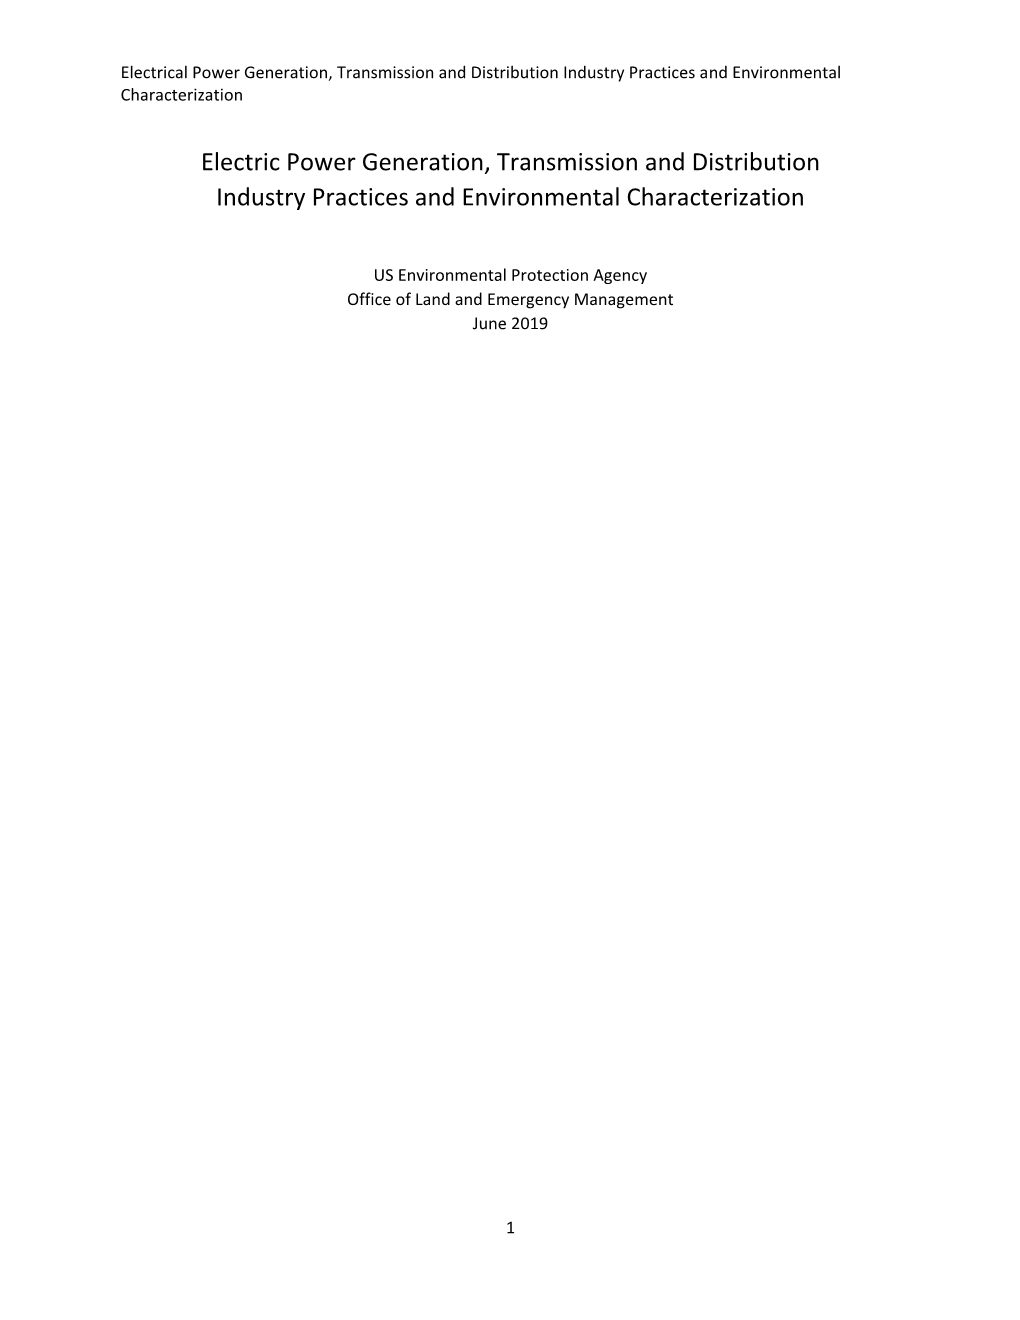 Electric Power Generation, Transmission and Distribution Industry Practices and Environmental Characterization